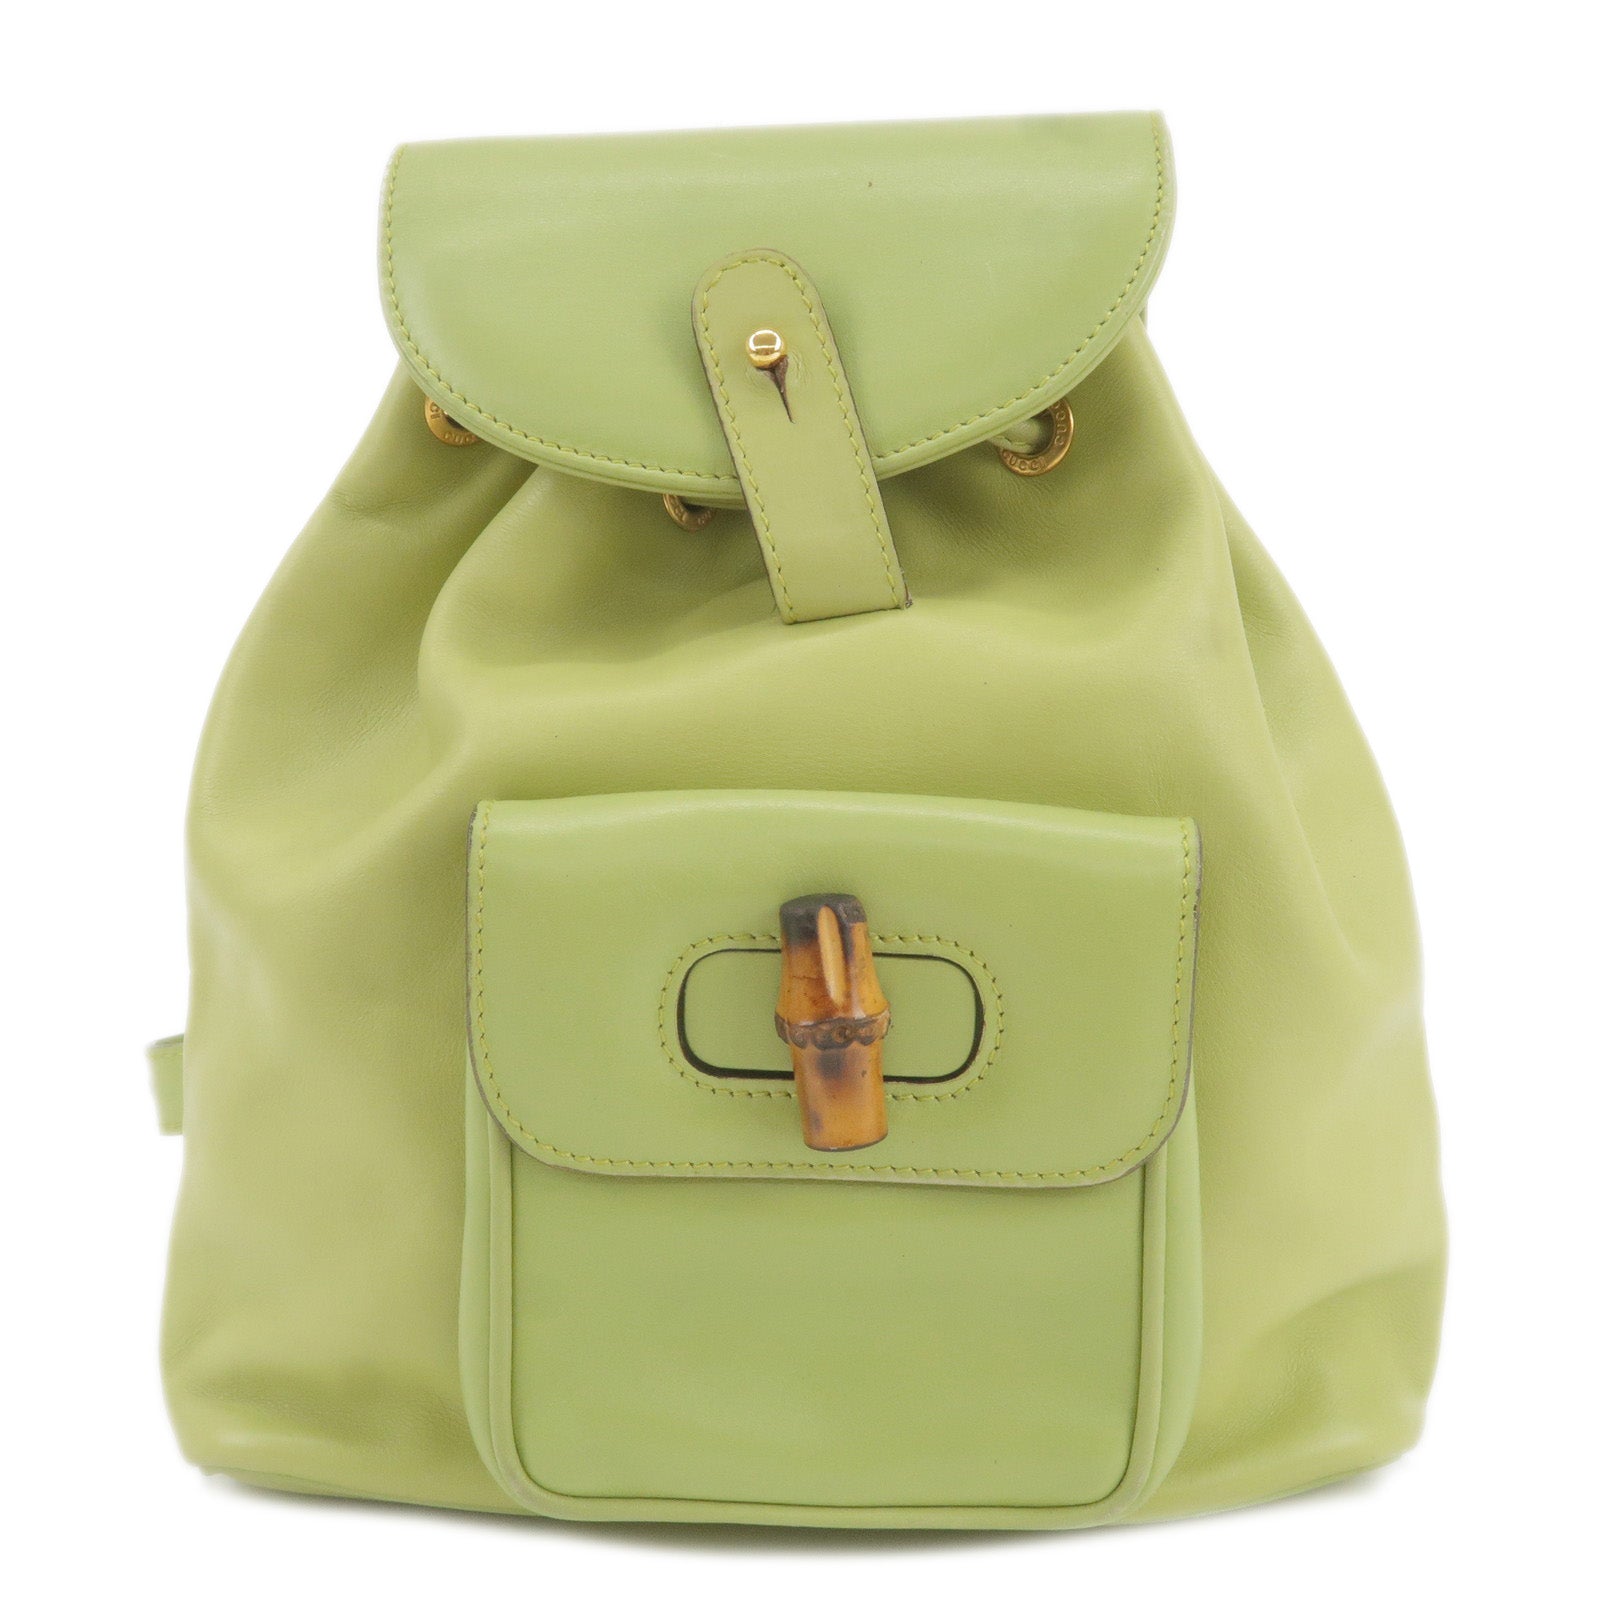 GUCCI-Bamboo-Leather-Back-Pack-Green-003･2058･0030